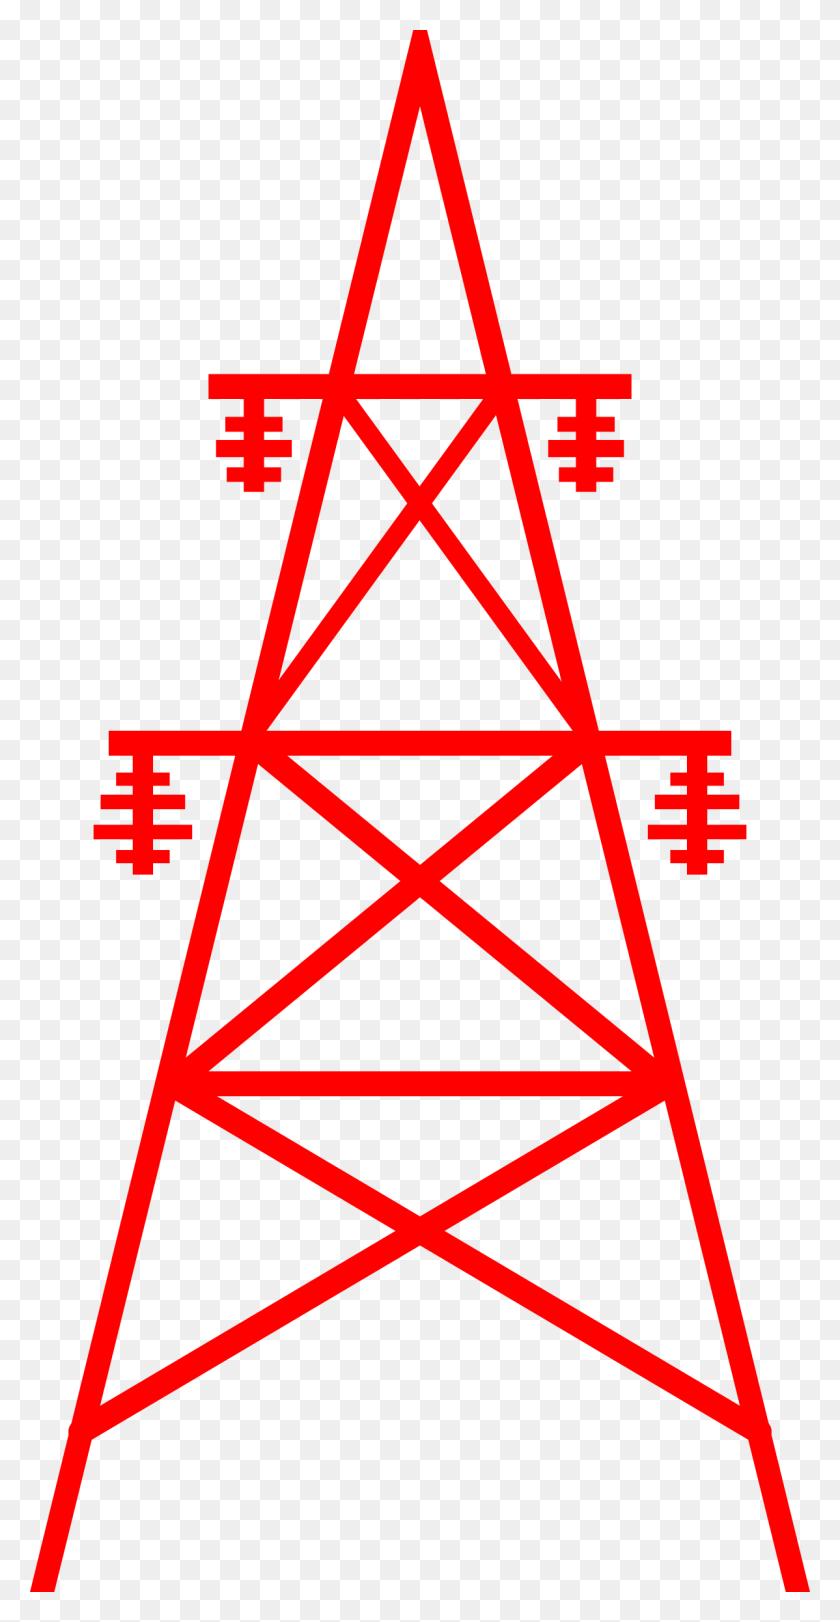 1198x2400 This Free Icons Design Of Transmission Tower 1 Great Power Comes Great Electricity Bill, Cable, Power Lines, Electric Transmission Tower HD PNG Download